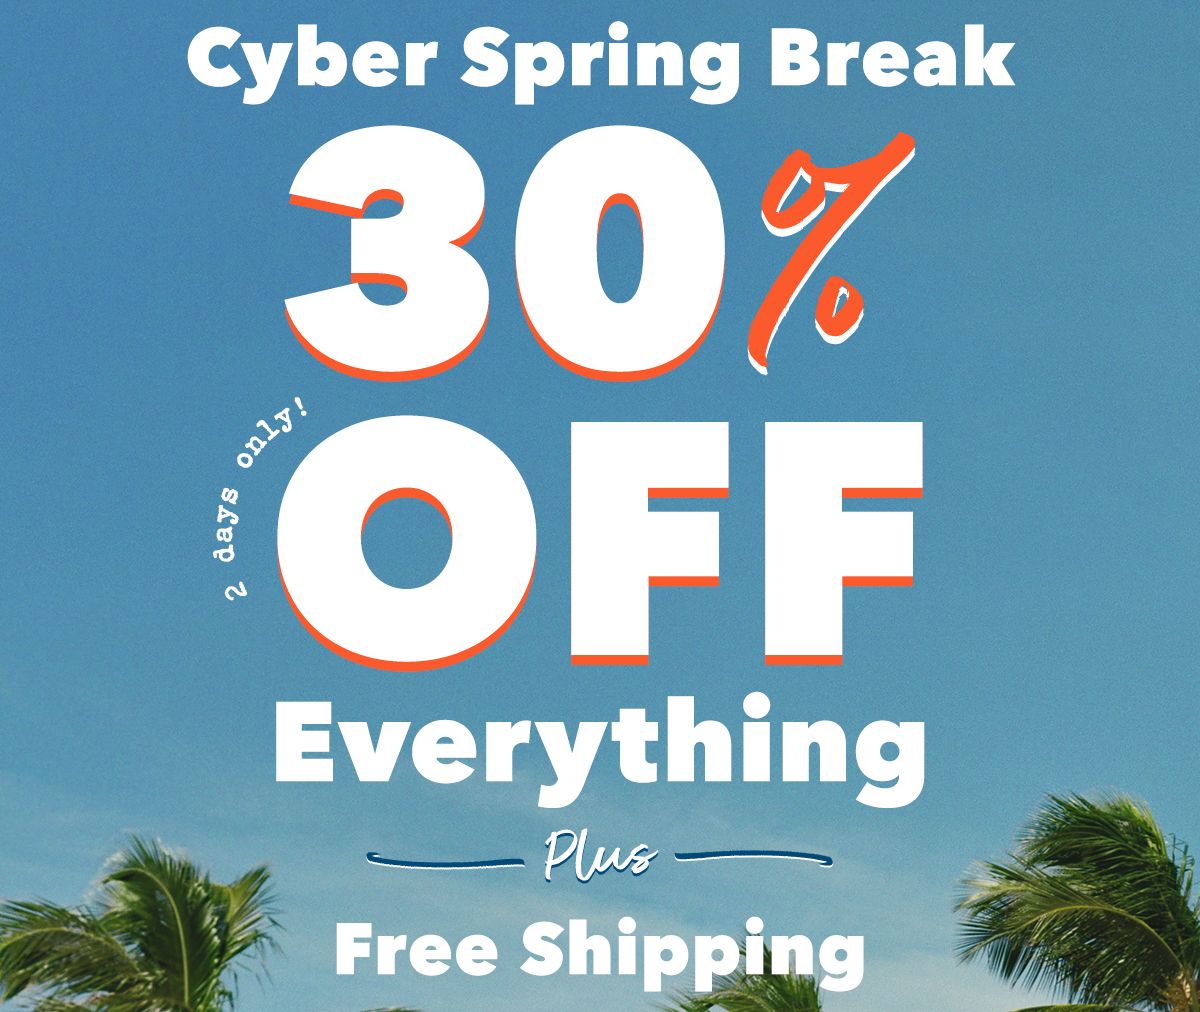 2 days only! Cyber Spring Break  30% Off Everything  Plus  Free Shipping Cyber Spring Break P: -d Iy Everything 